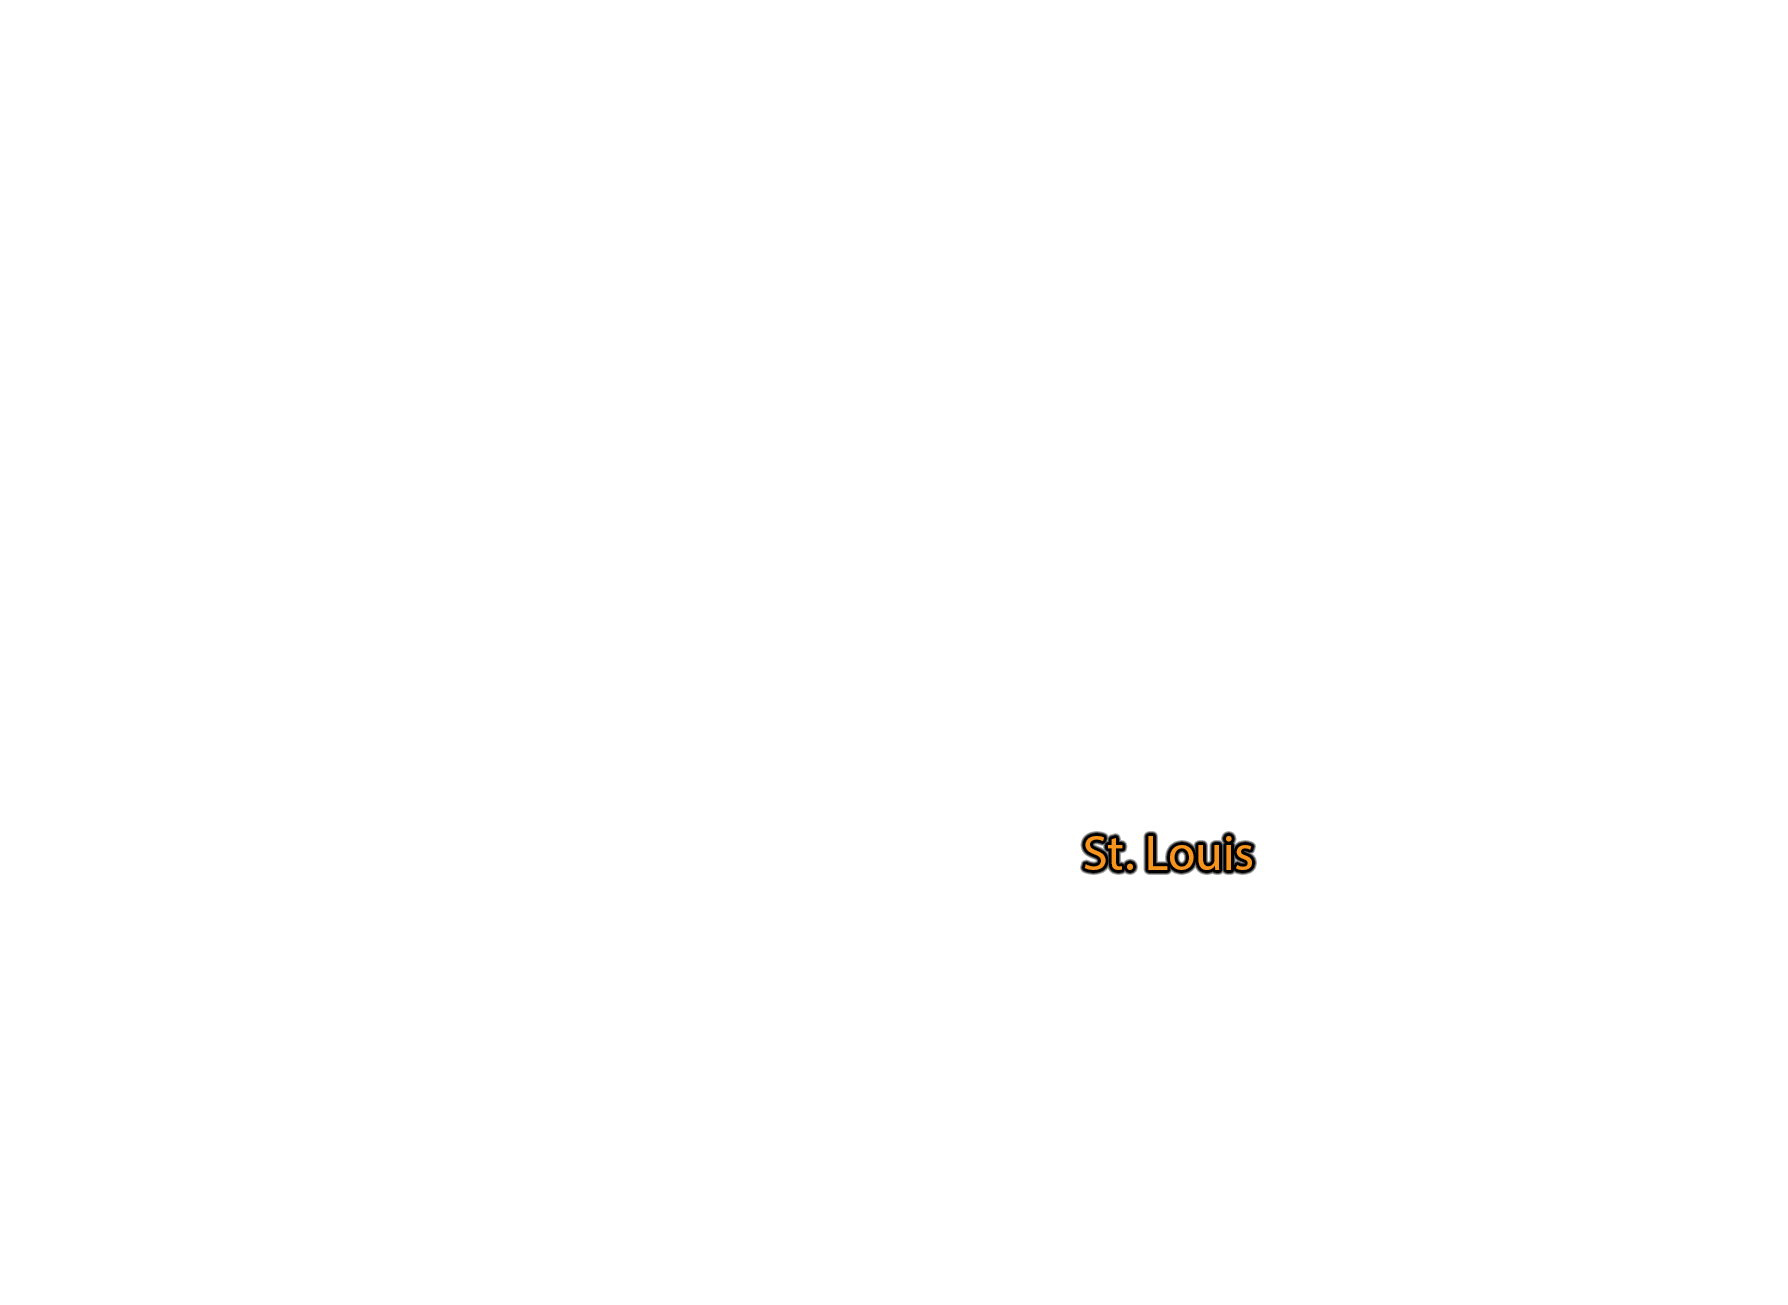 St.-Louis label with glow